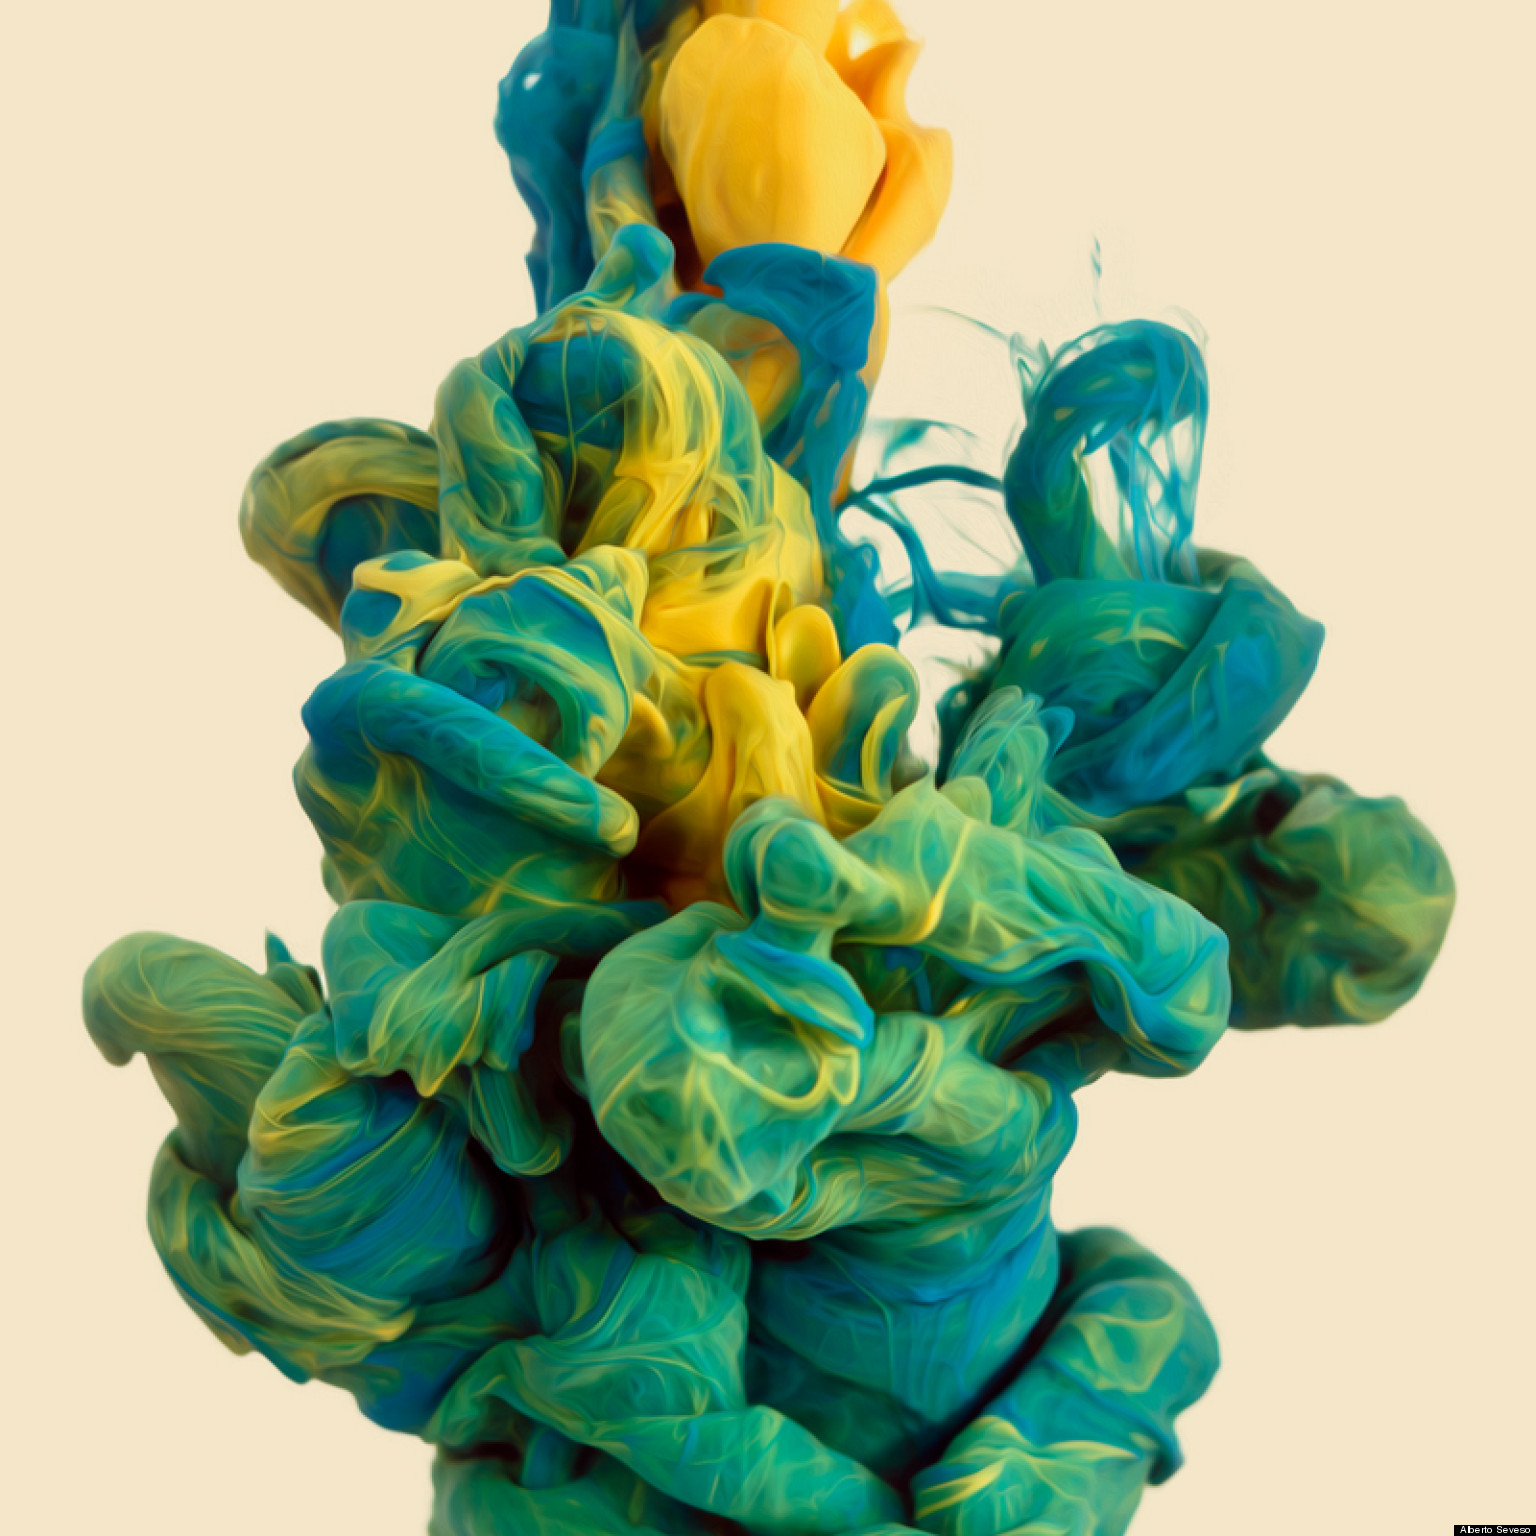 Ink In Water Alberto Seveso Shows Us Beauty Beneath The Surface